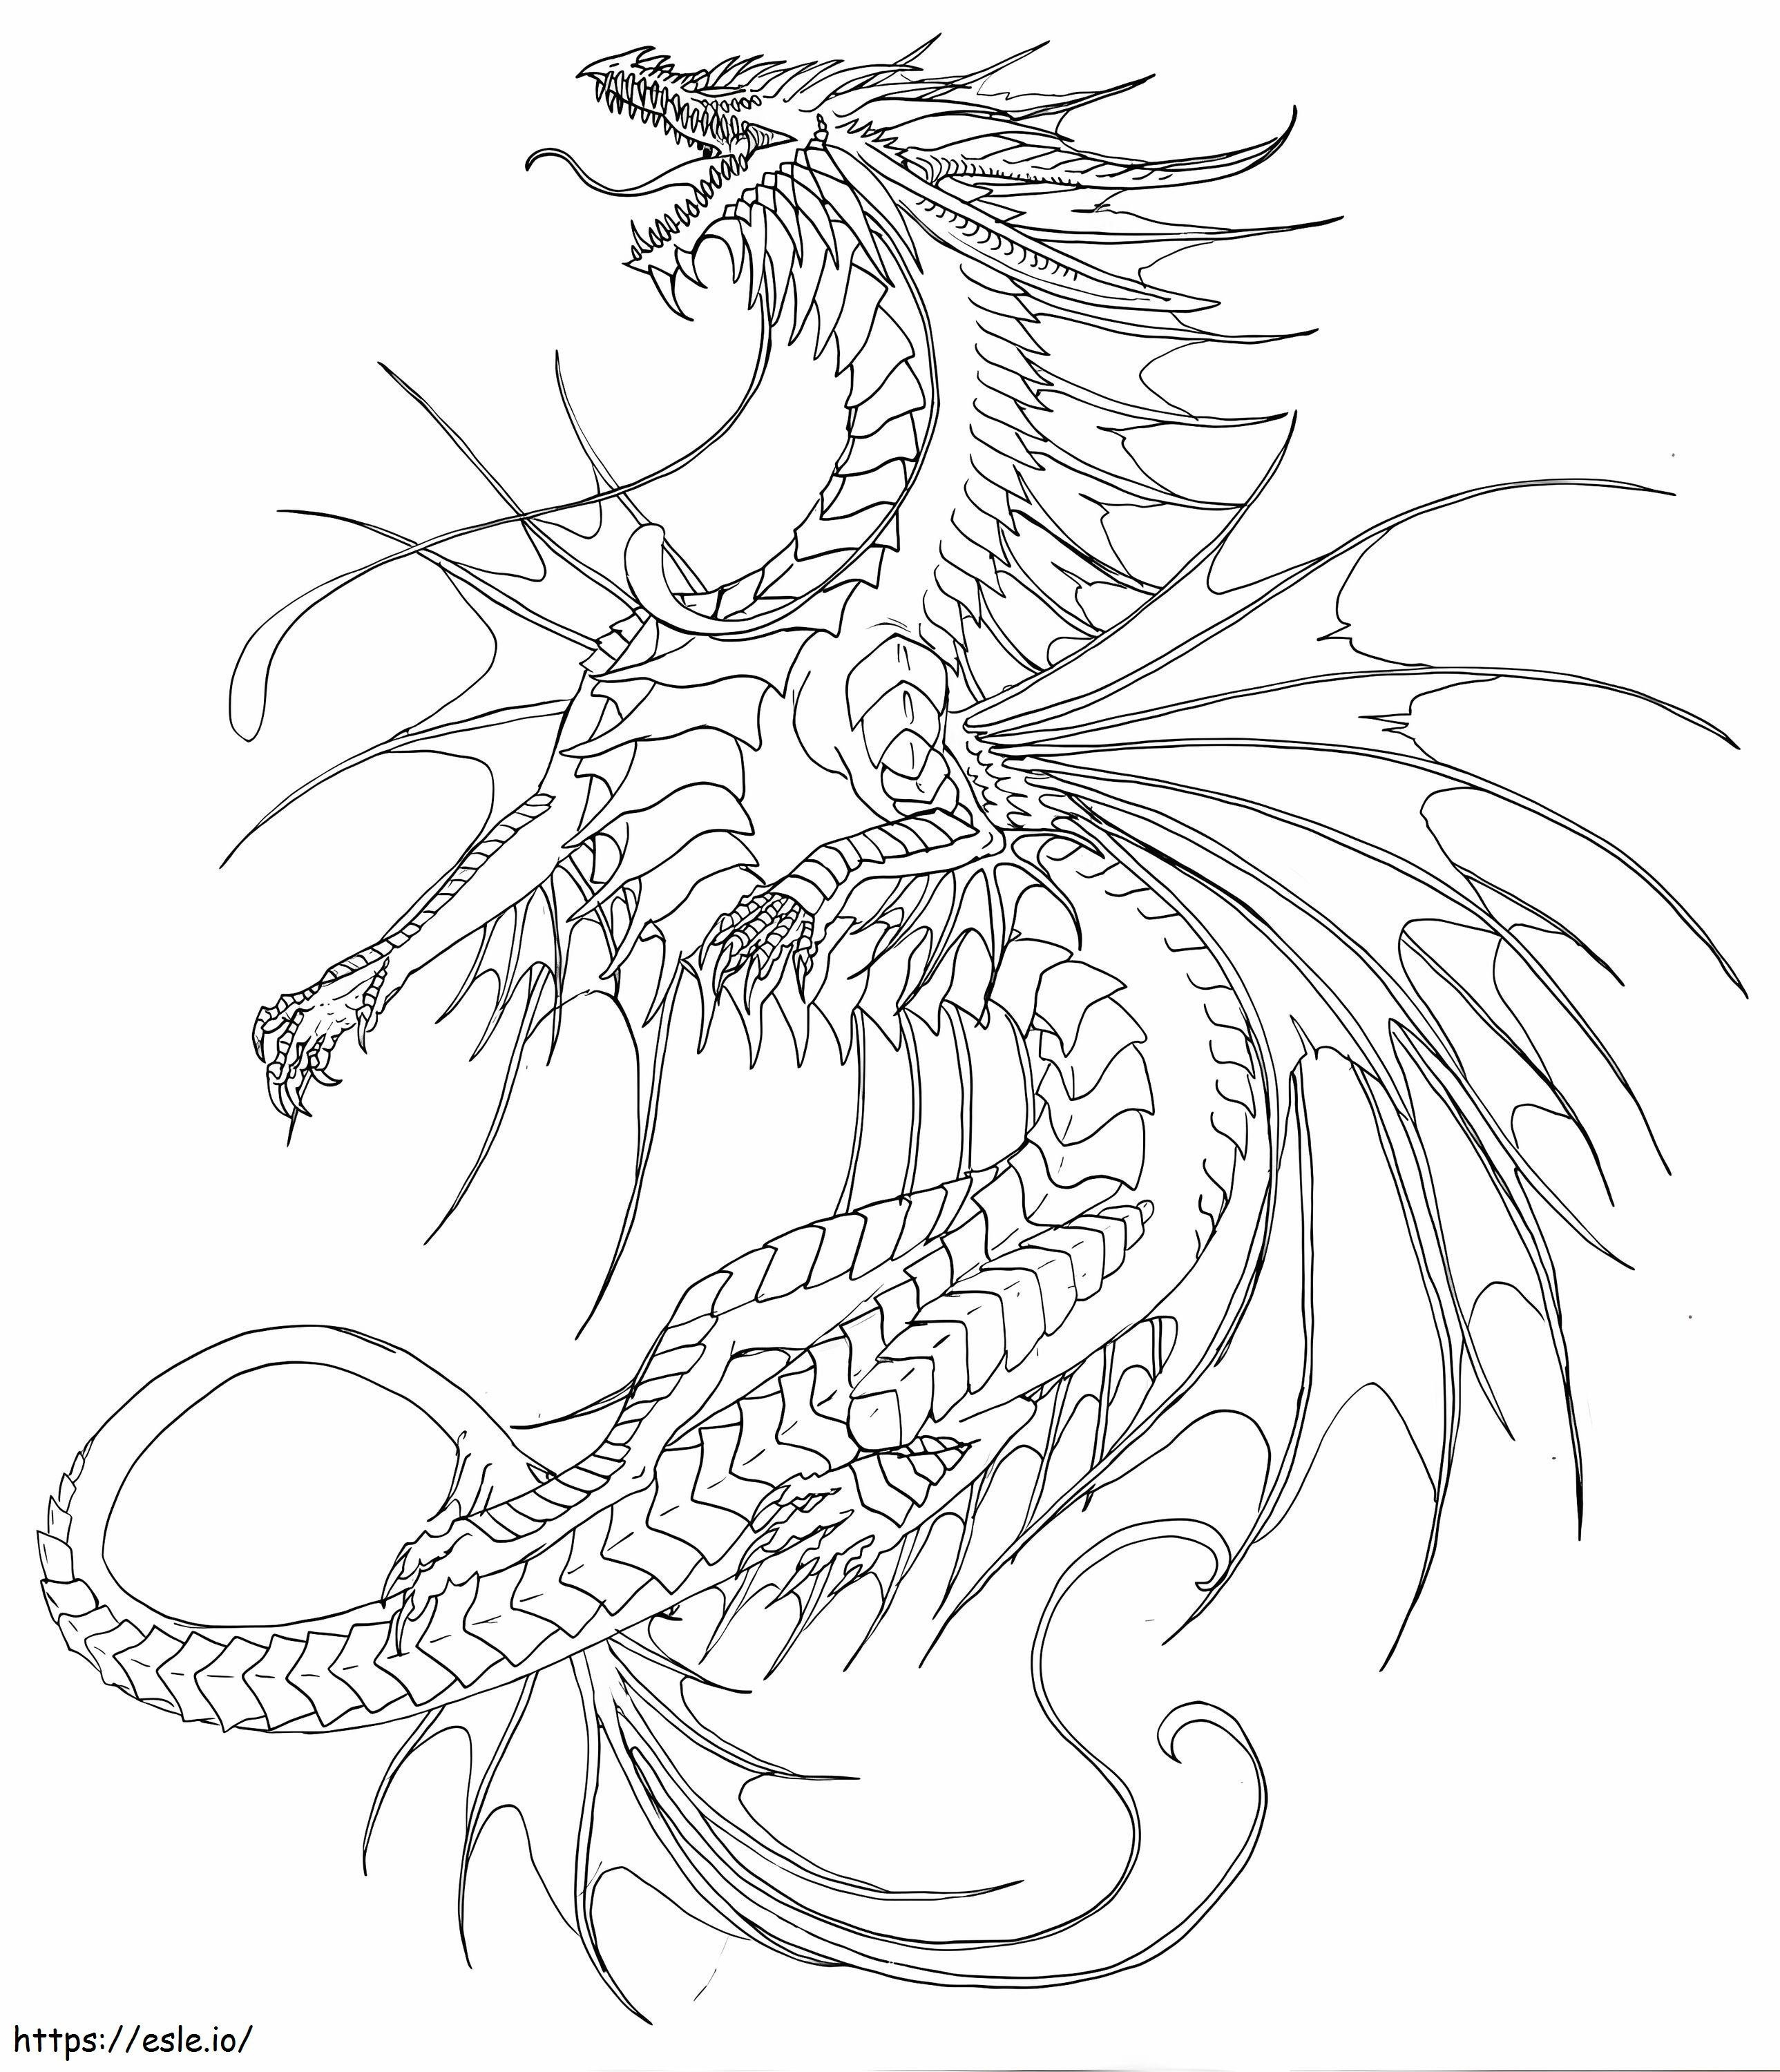 Amazing Sea Serpent coloring page